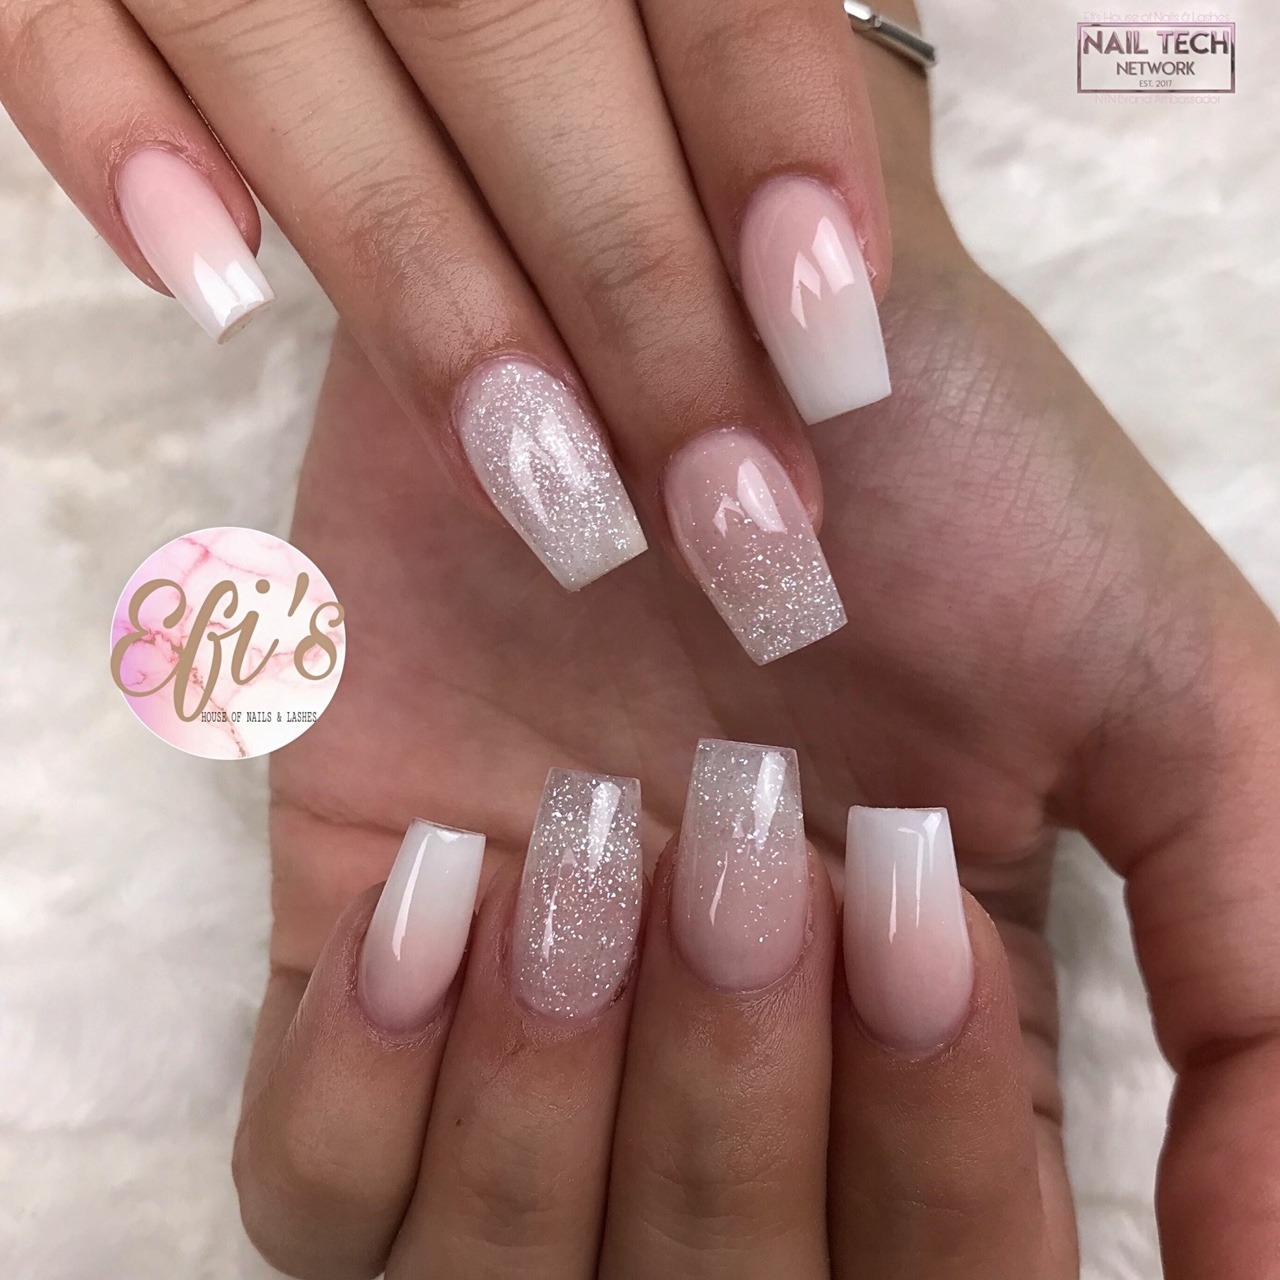 Baby Boomer Nails With Gems | suturasonline.com.br